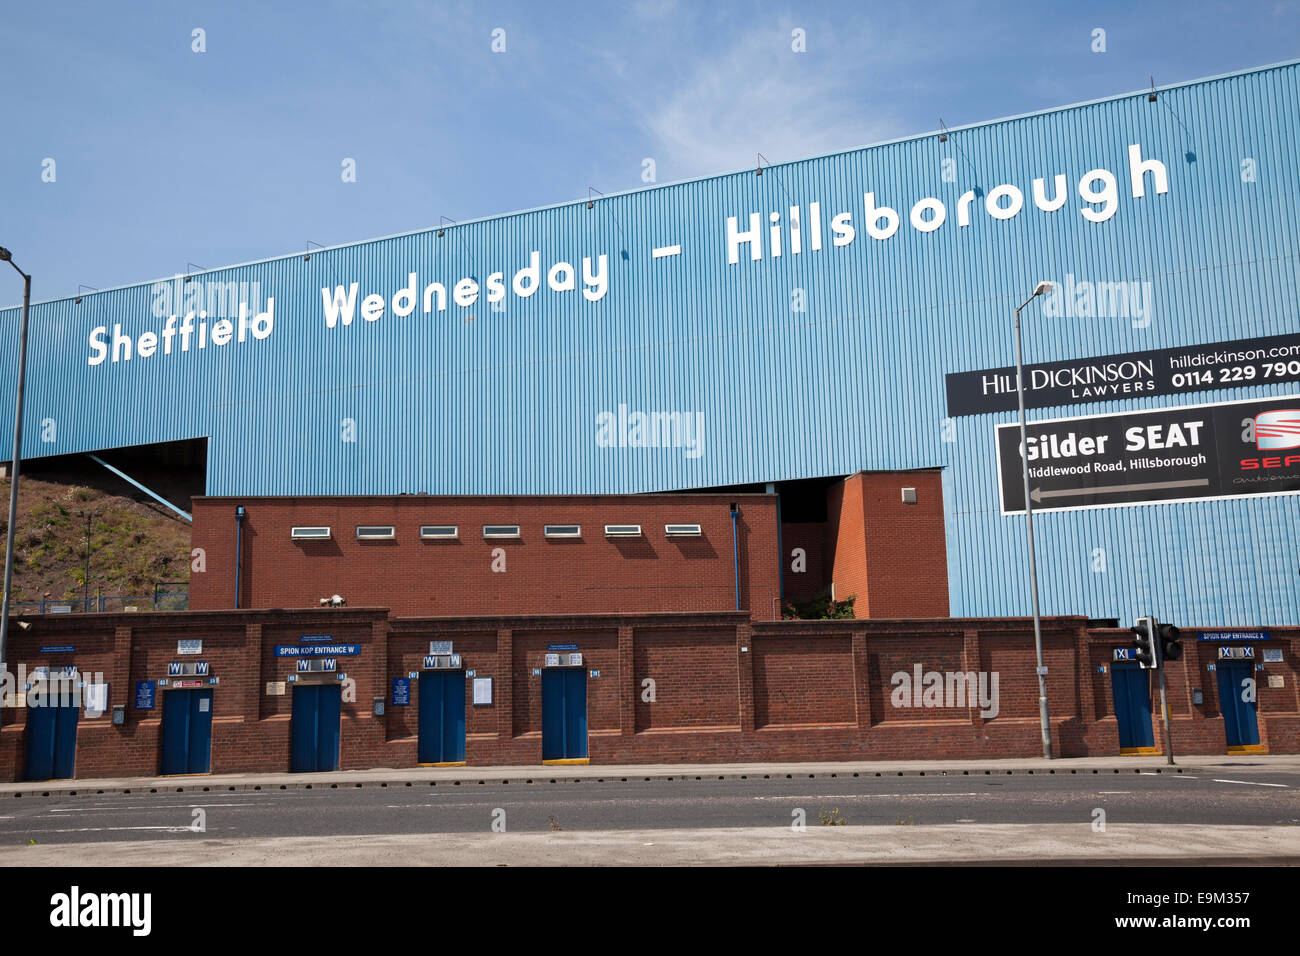 Sheffield Wednesday Football Club, Hillsborough, Sheffield, South Yorkshire, Angleterre, Royaume-Uni Banque D'Images